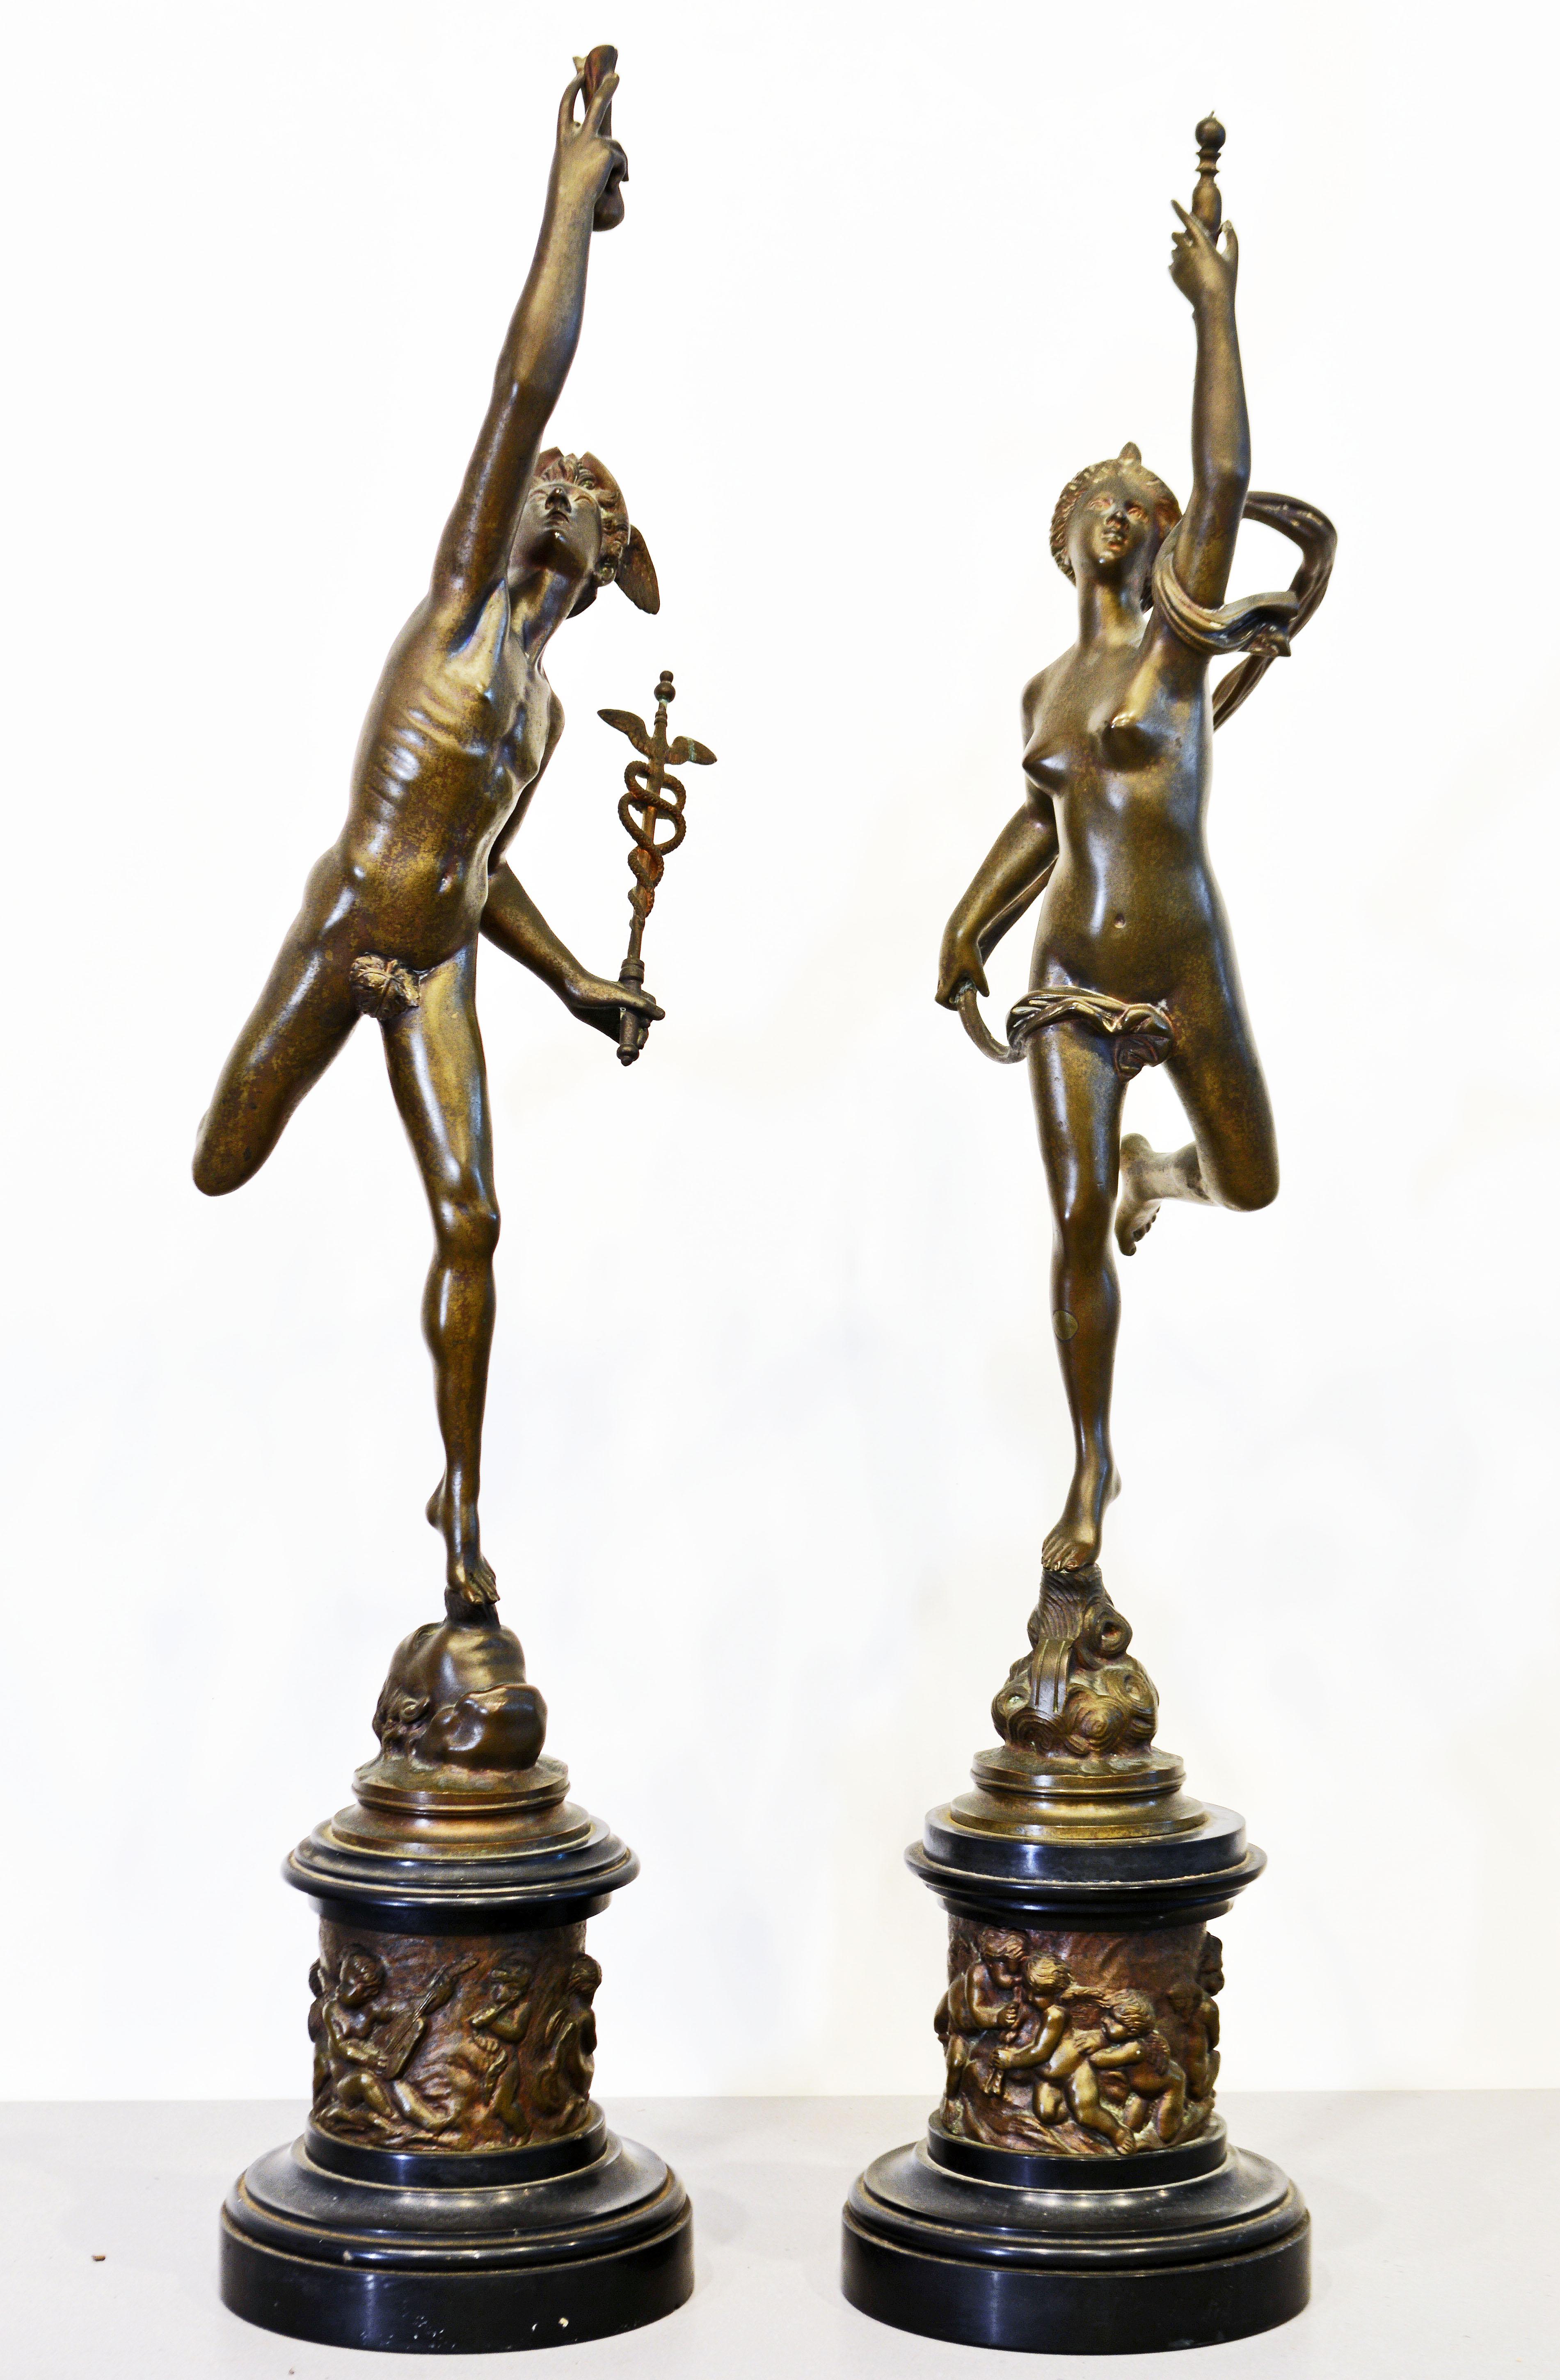 A pair of late 19th century Italian Grand Tour’ bronzes after Giambologna (1529-1608) The figure of Mercury depicted with winged feet & helmet, holding a Caduceus in hand, Fortuna wrapped in flowing robes. Mercury raised on a blowing Zephyr, Fortuna